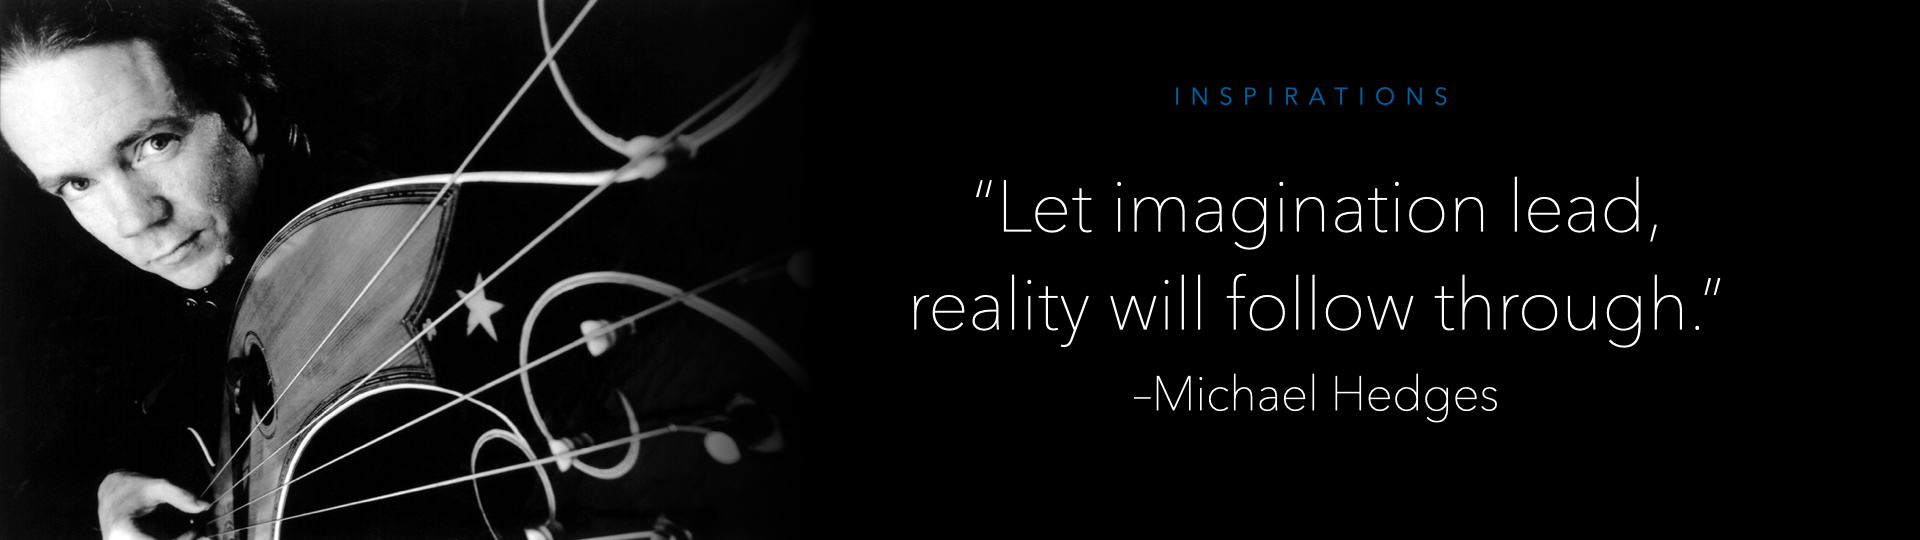 Let imagination lead, reality will follow through. – Michael Hedges